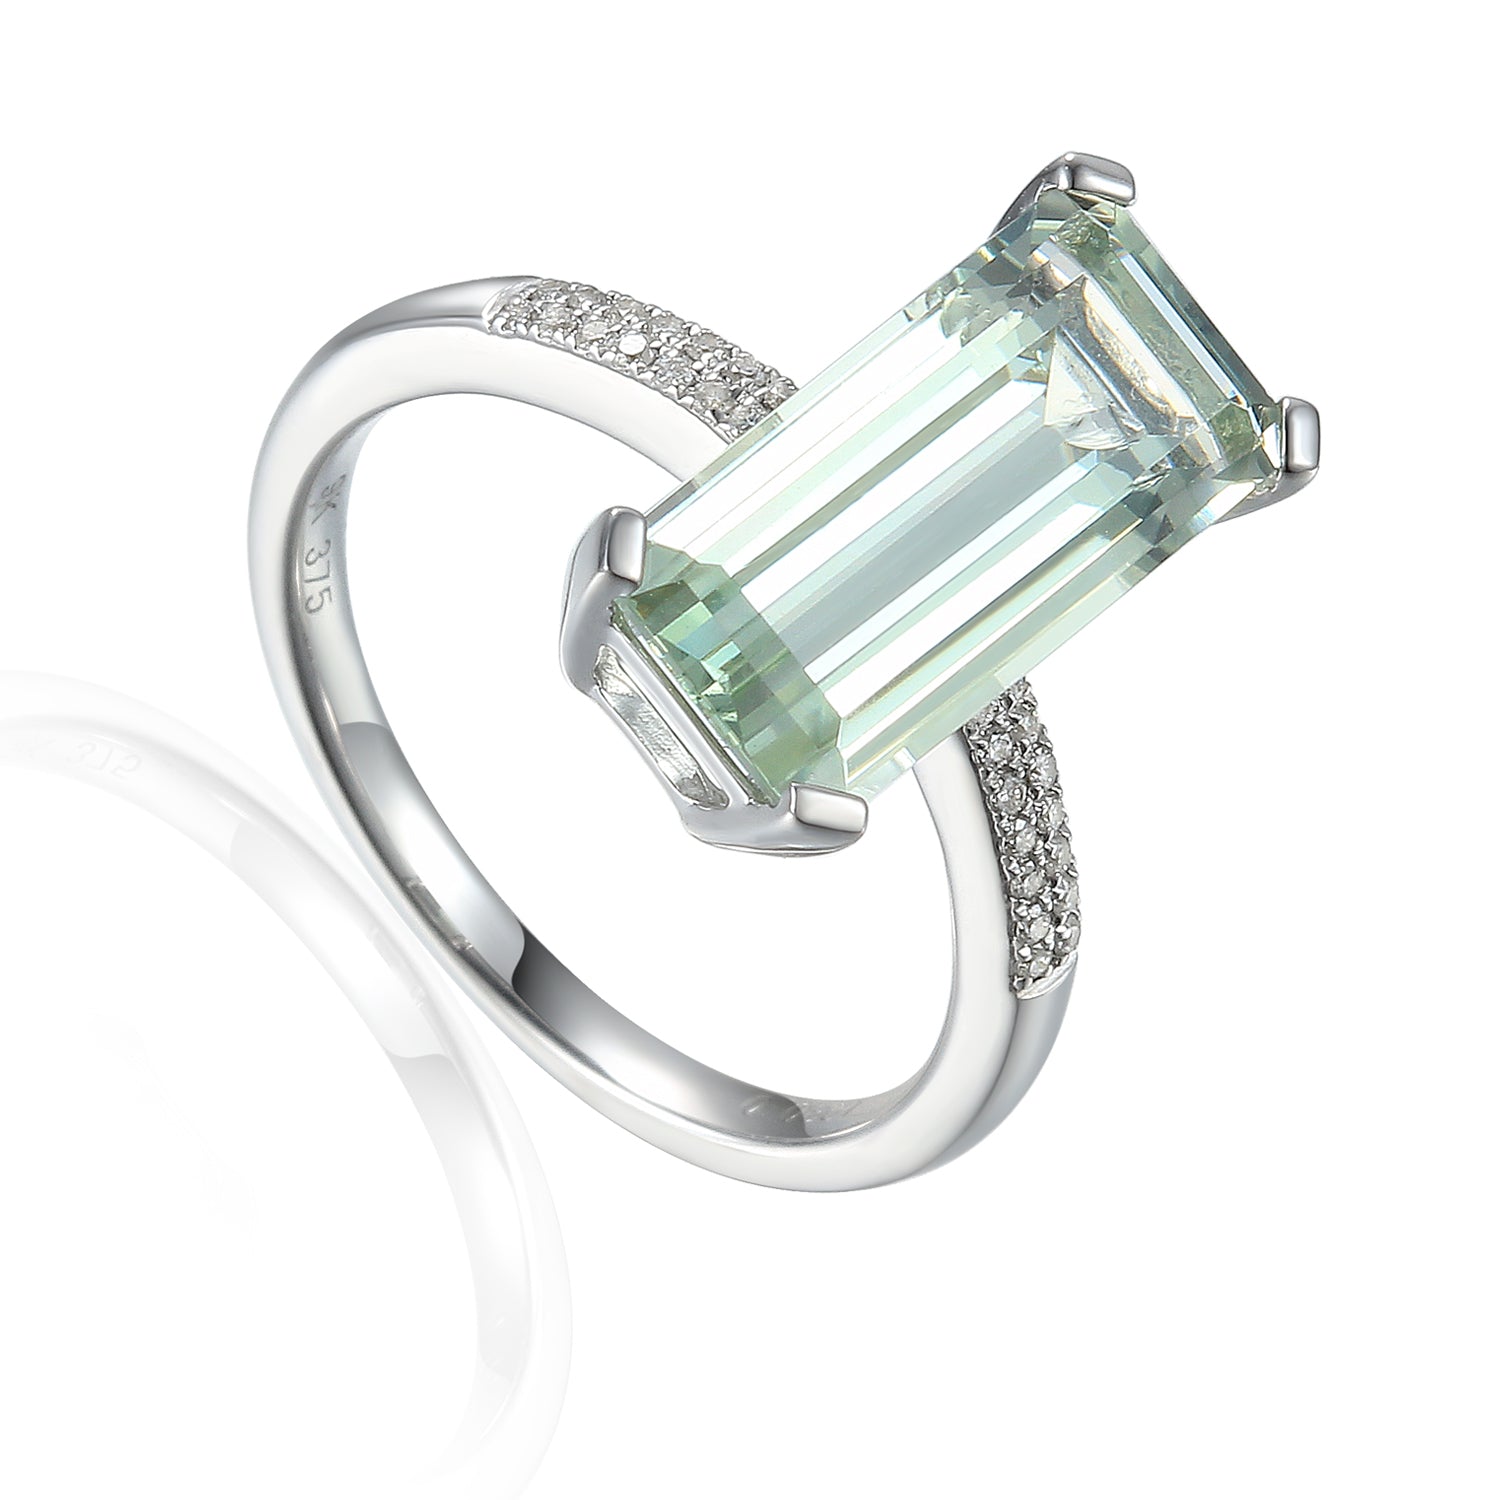 Long octagon Gemstone Ring with Pave Diamond Shoulders